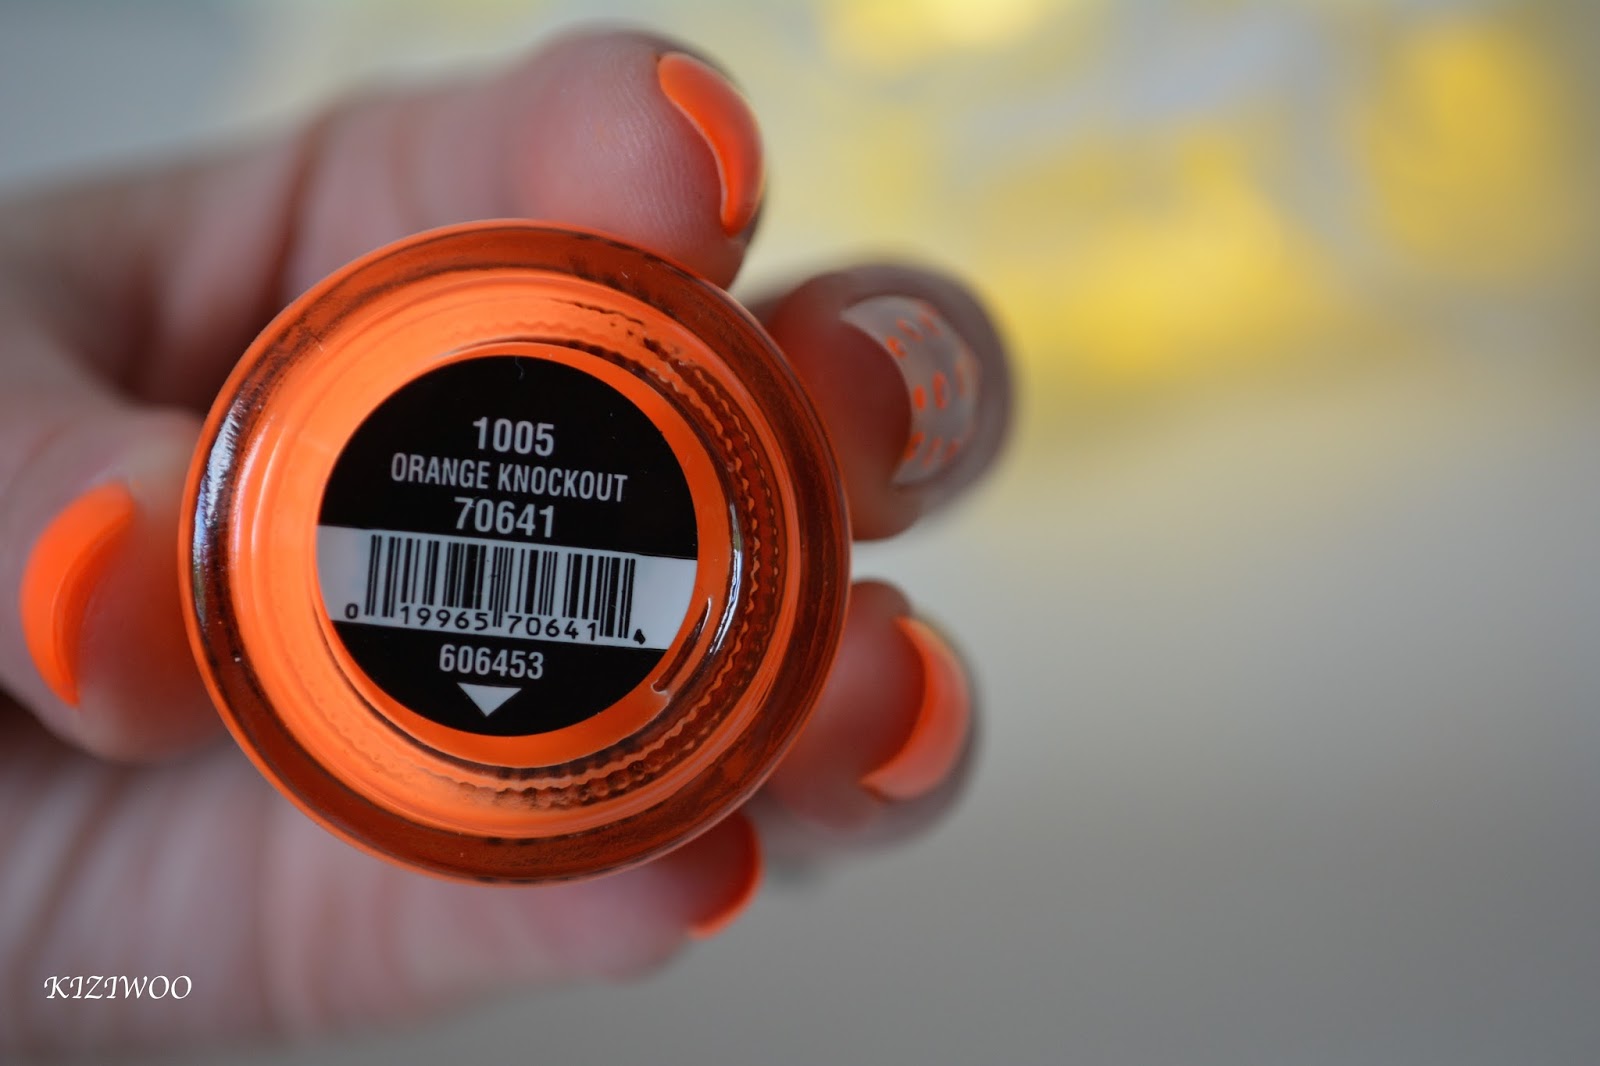 10. China Glaze Nail Lacquer in "Orange Knockout" - wide 7